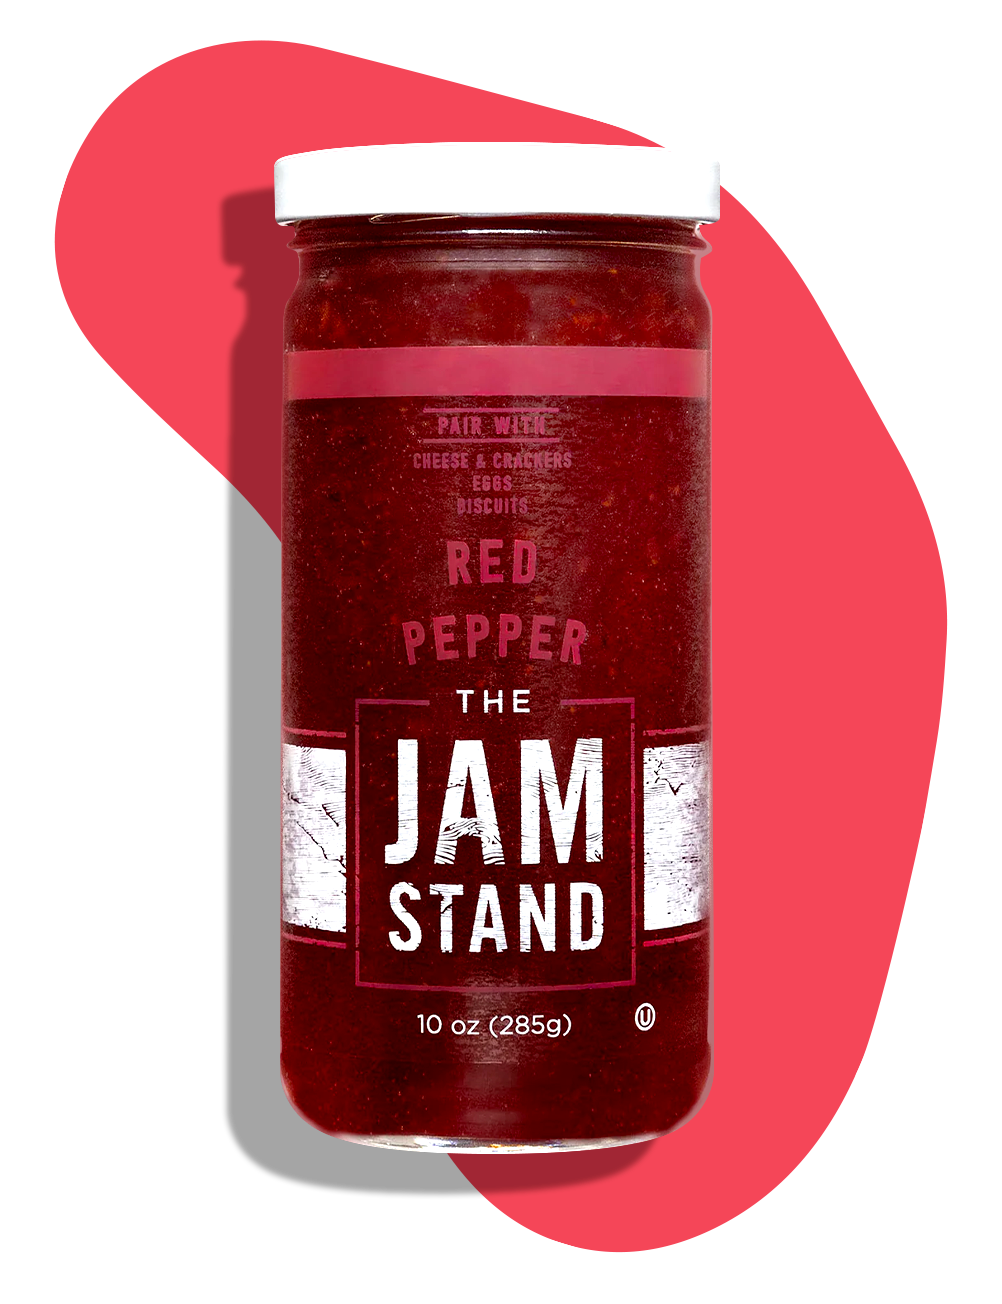 The Jam Stand: Red Pepper Jam